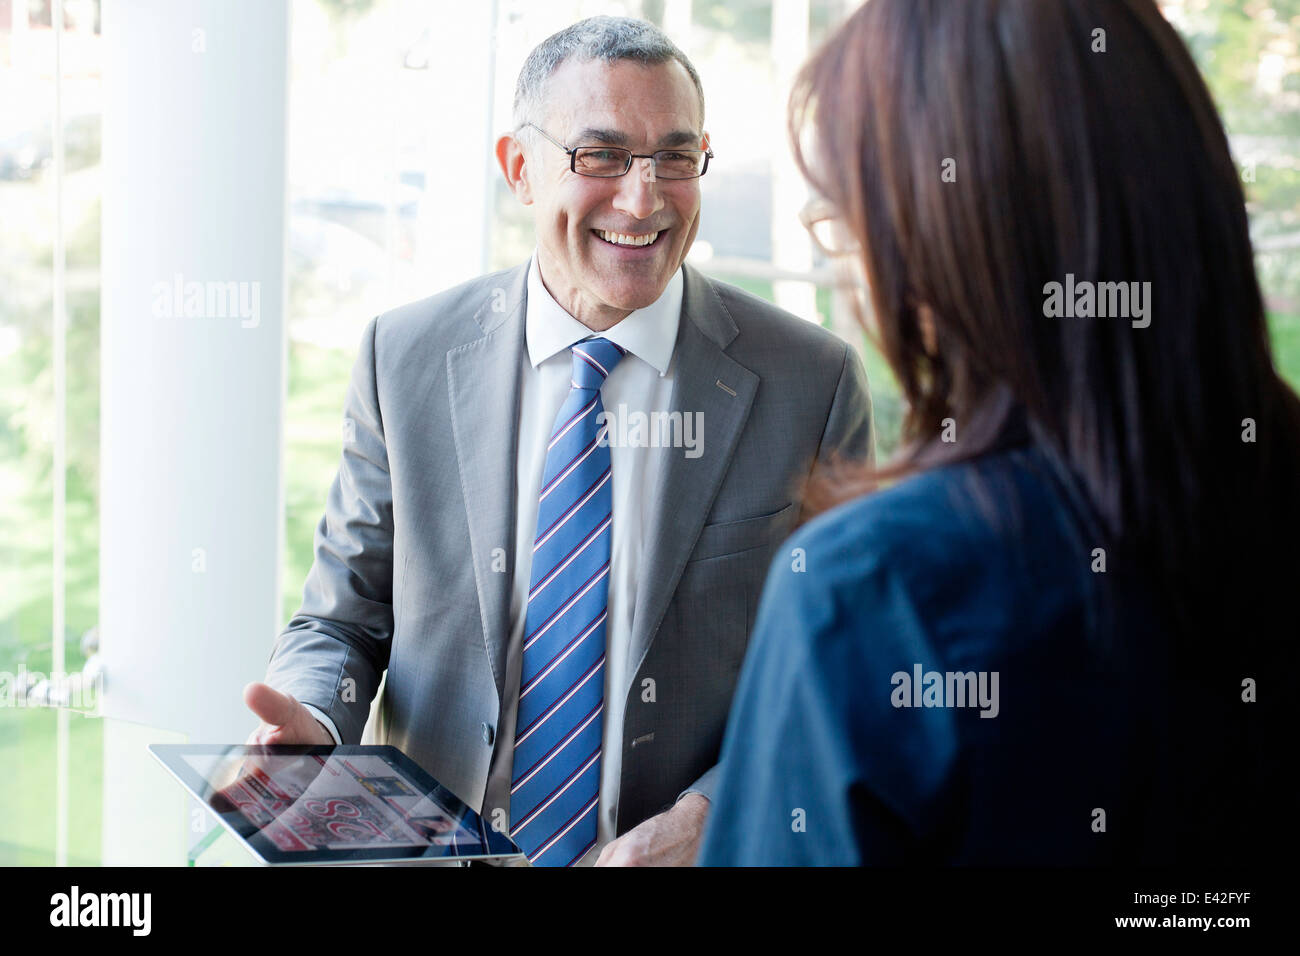 Businessman and woman using digital tablet Banque D'Images